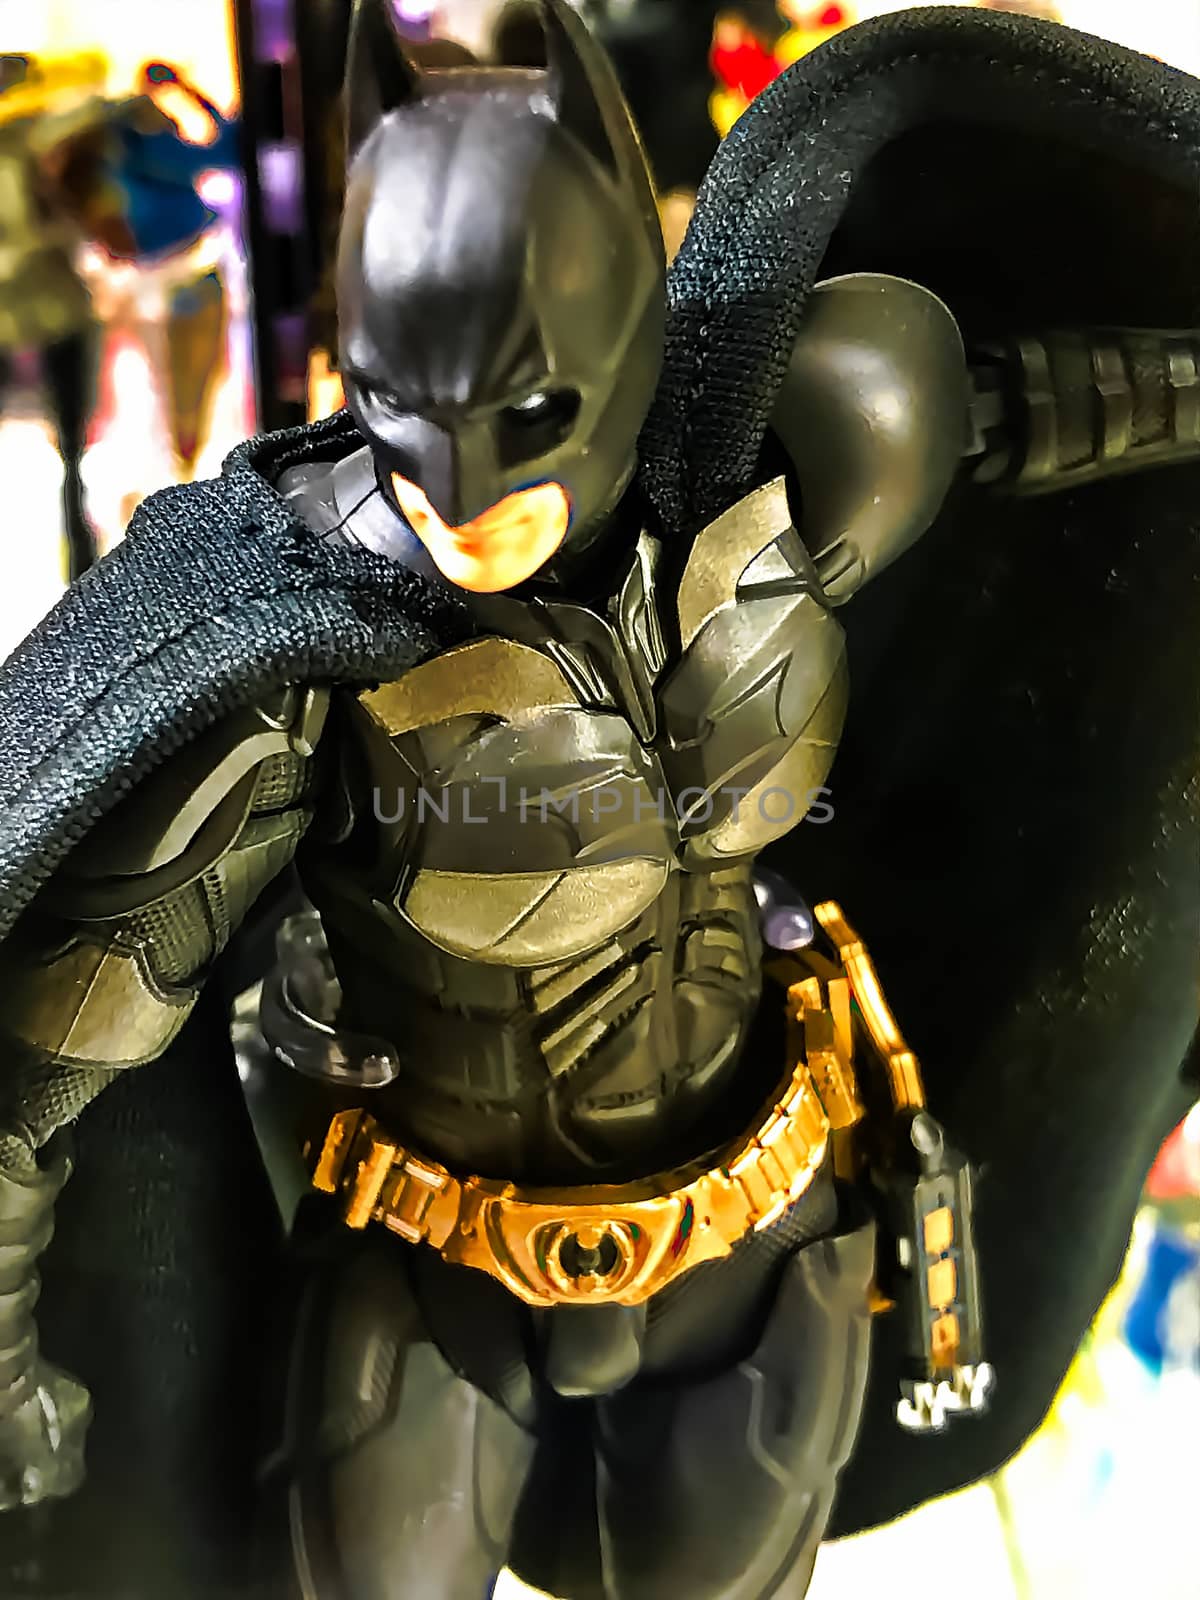 Osaka, Japan - Apr 23, 2019: Focused on  DC Multiverse Series action figure BATMAN out of toys shop.